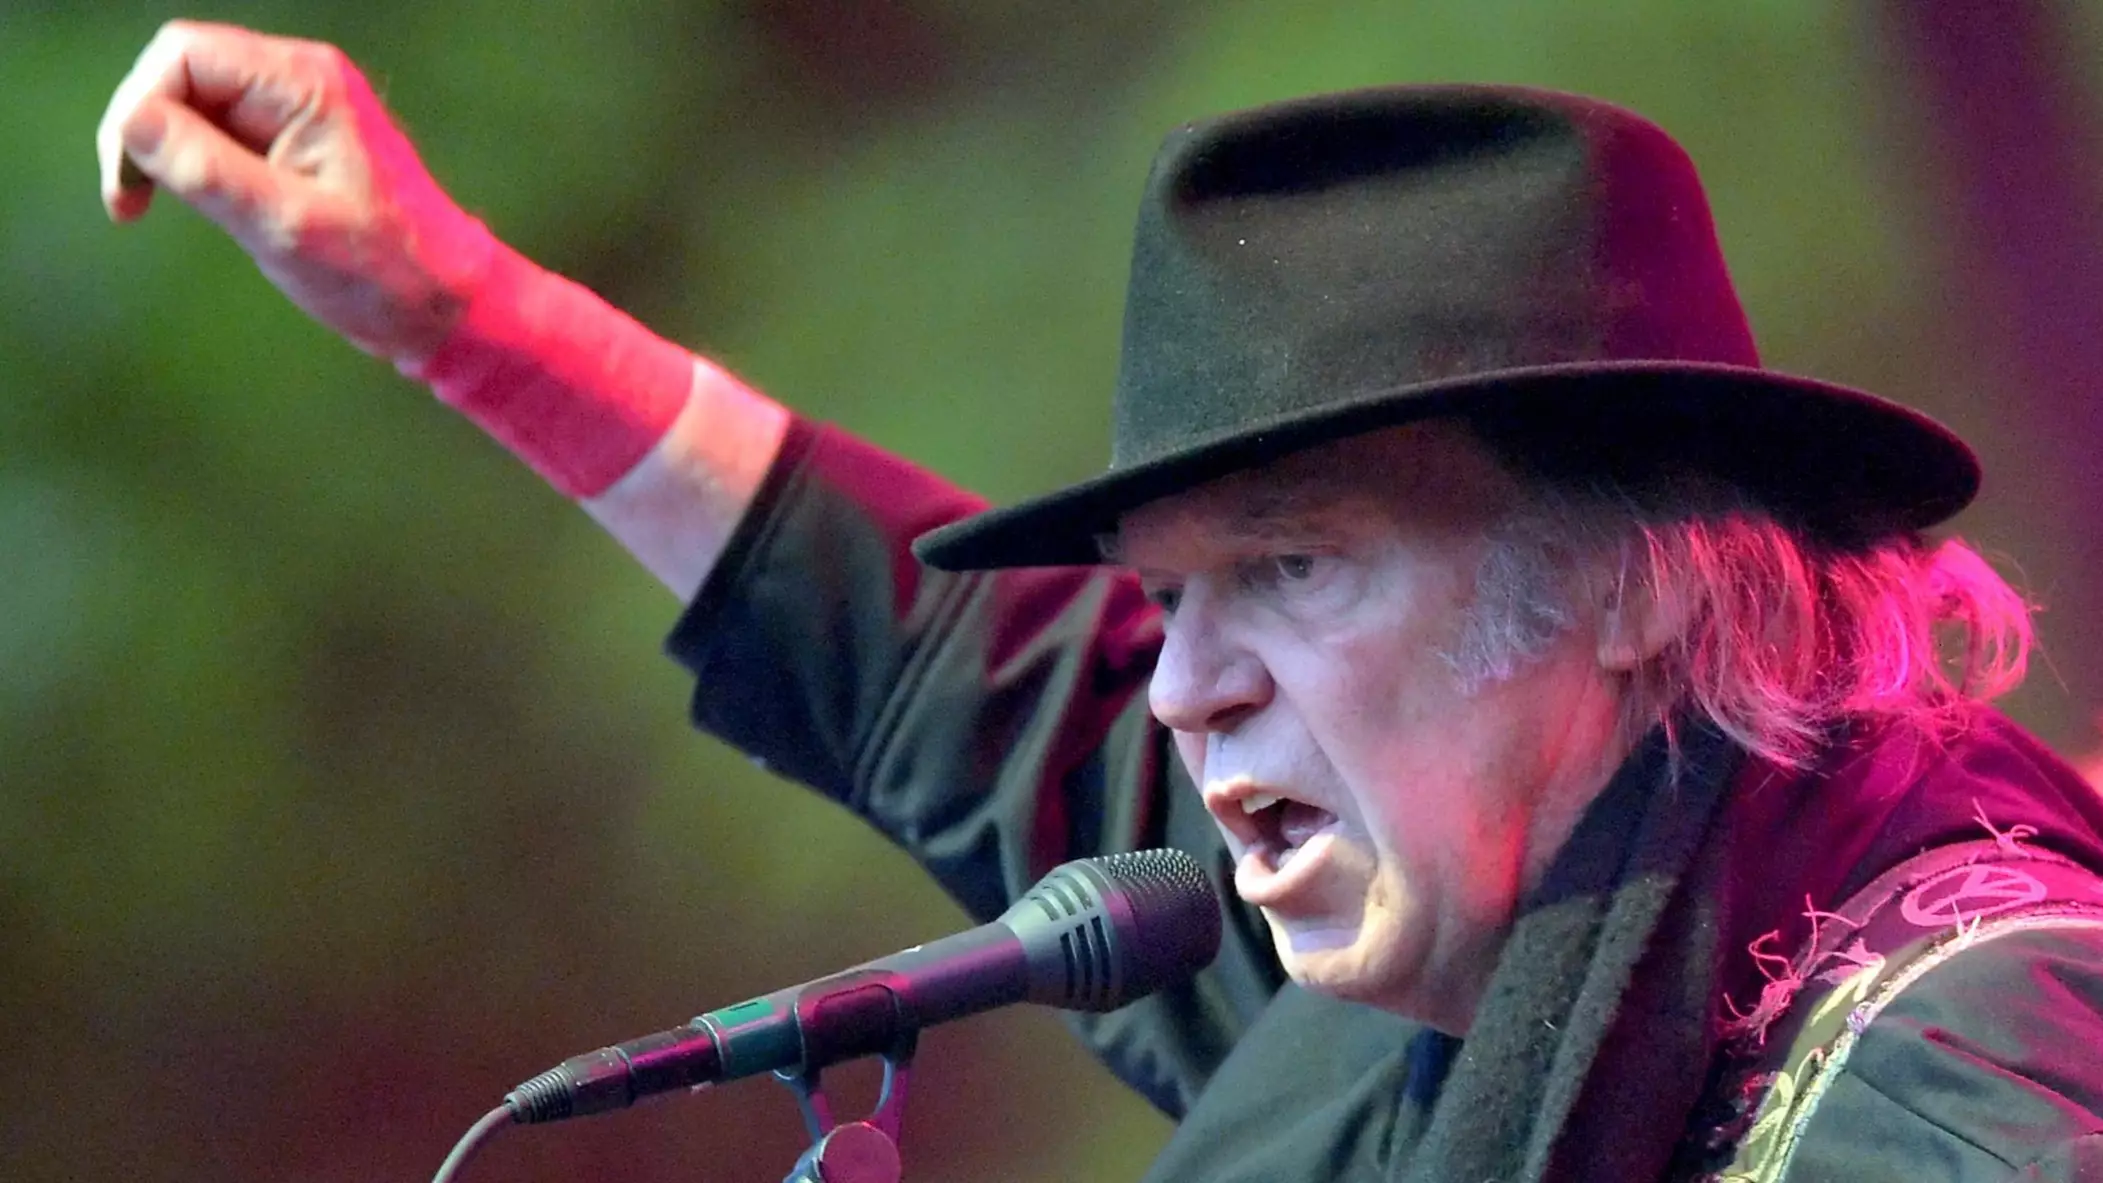 Spotify Agrees To Pull Neil Young's Music After He Slammed Joe Rogan's Podcast